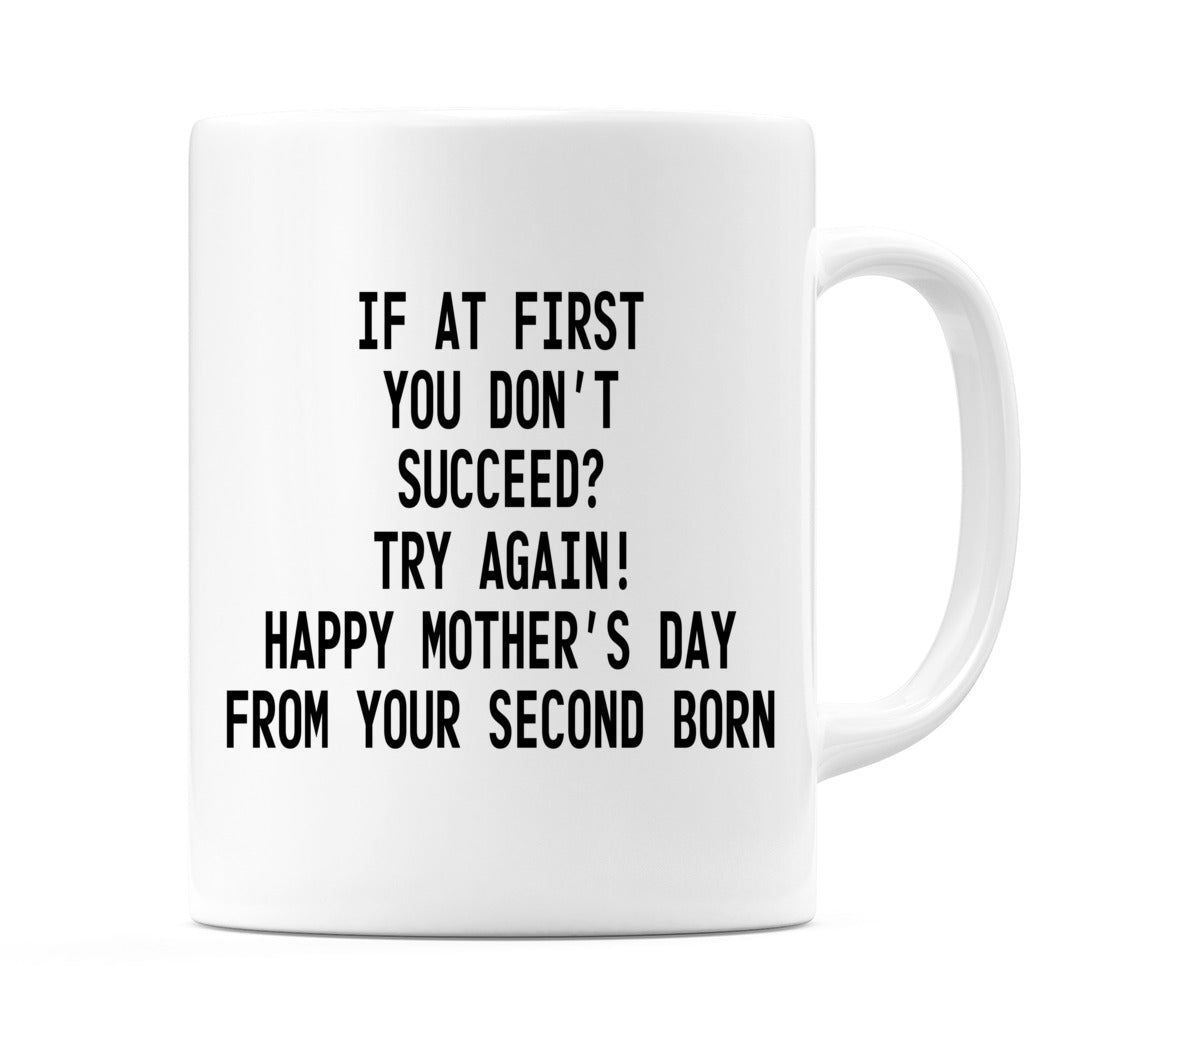 If at First You Don’t Succeed - From Your Second Born Mug